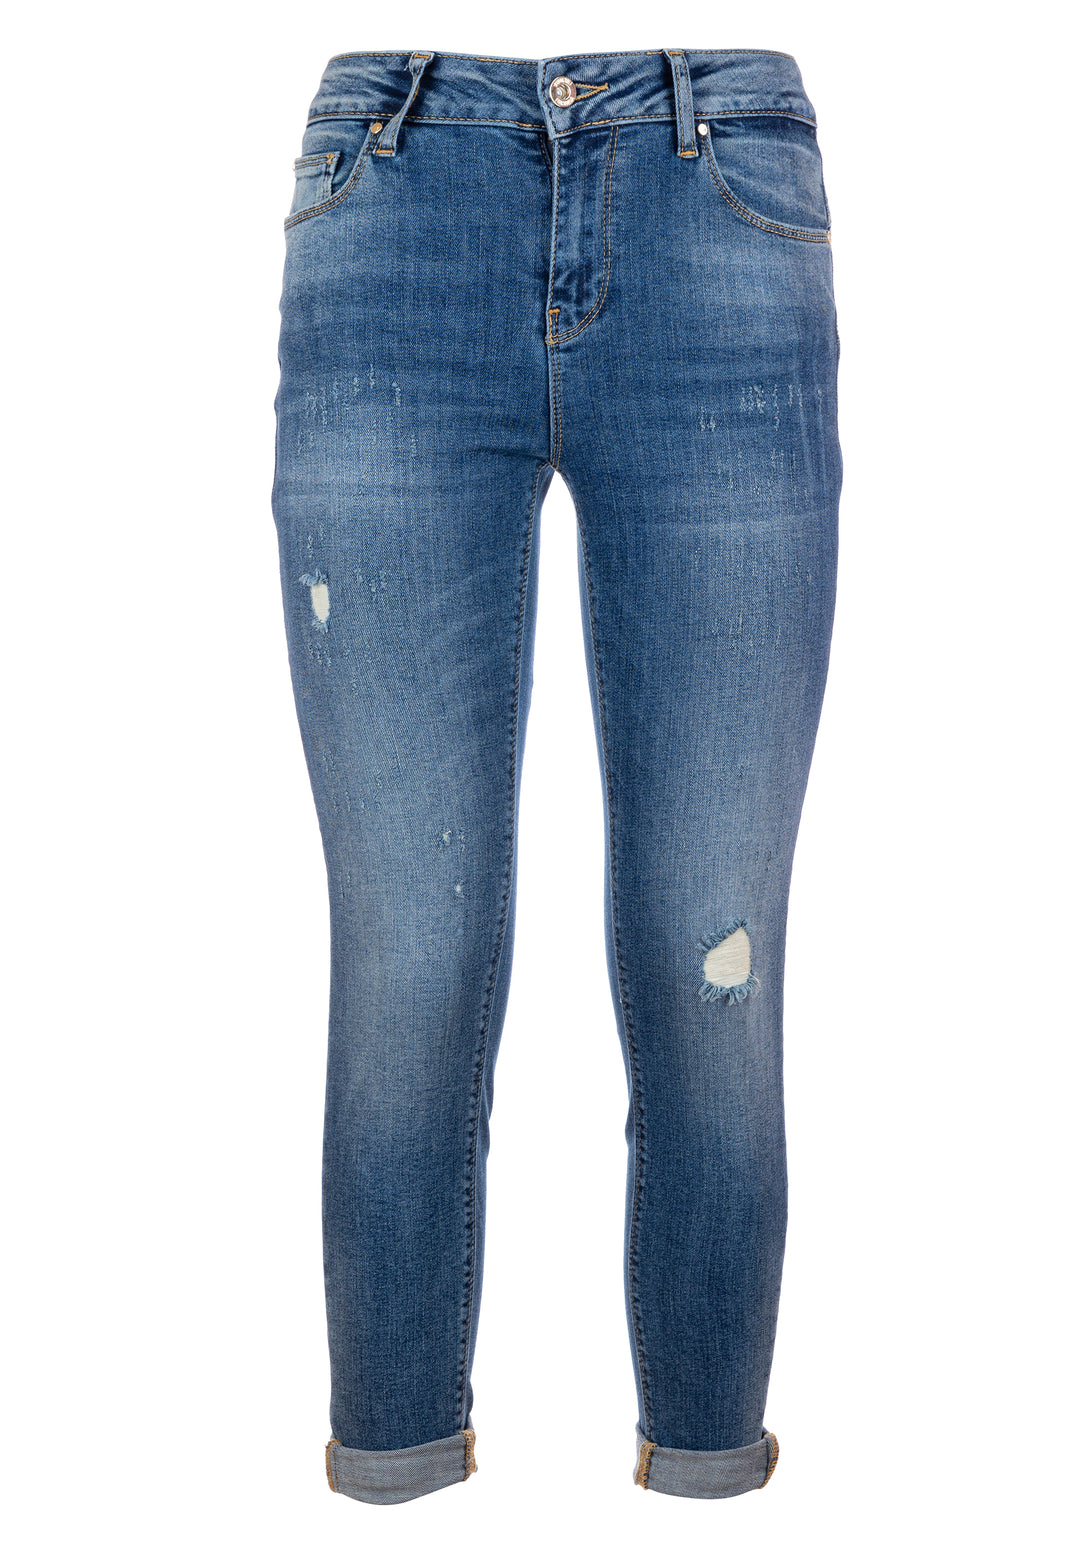 Jeans slim fit with push up effect made in denim with vintage wash